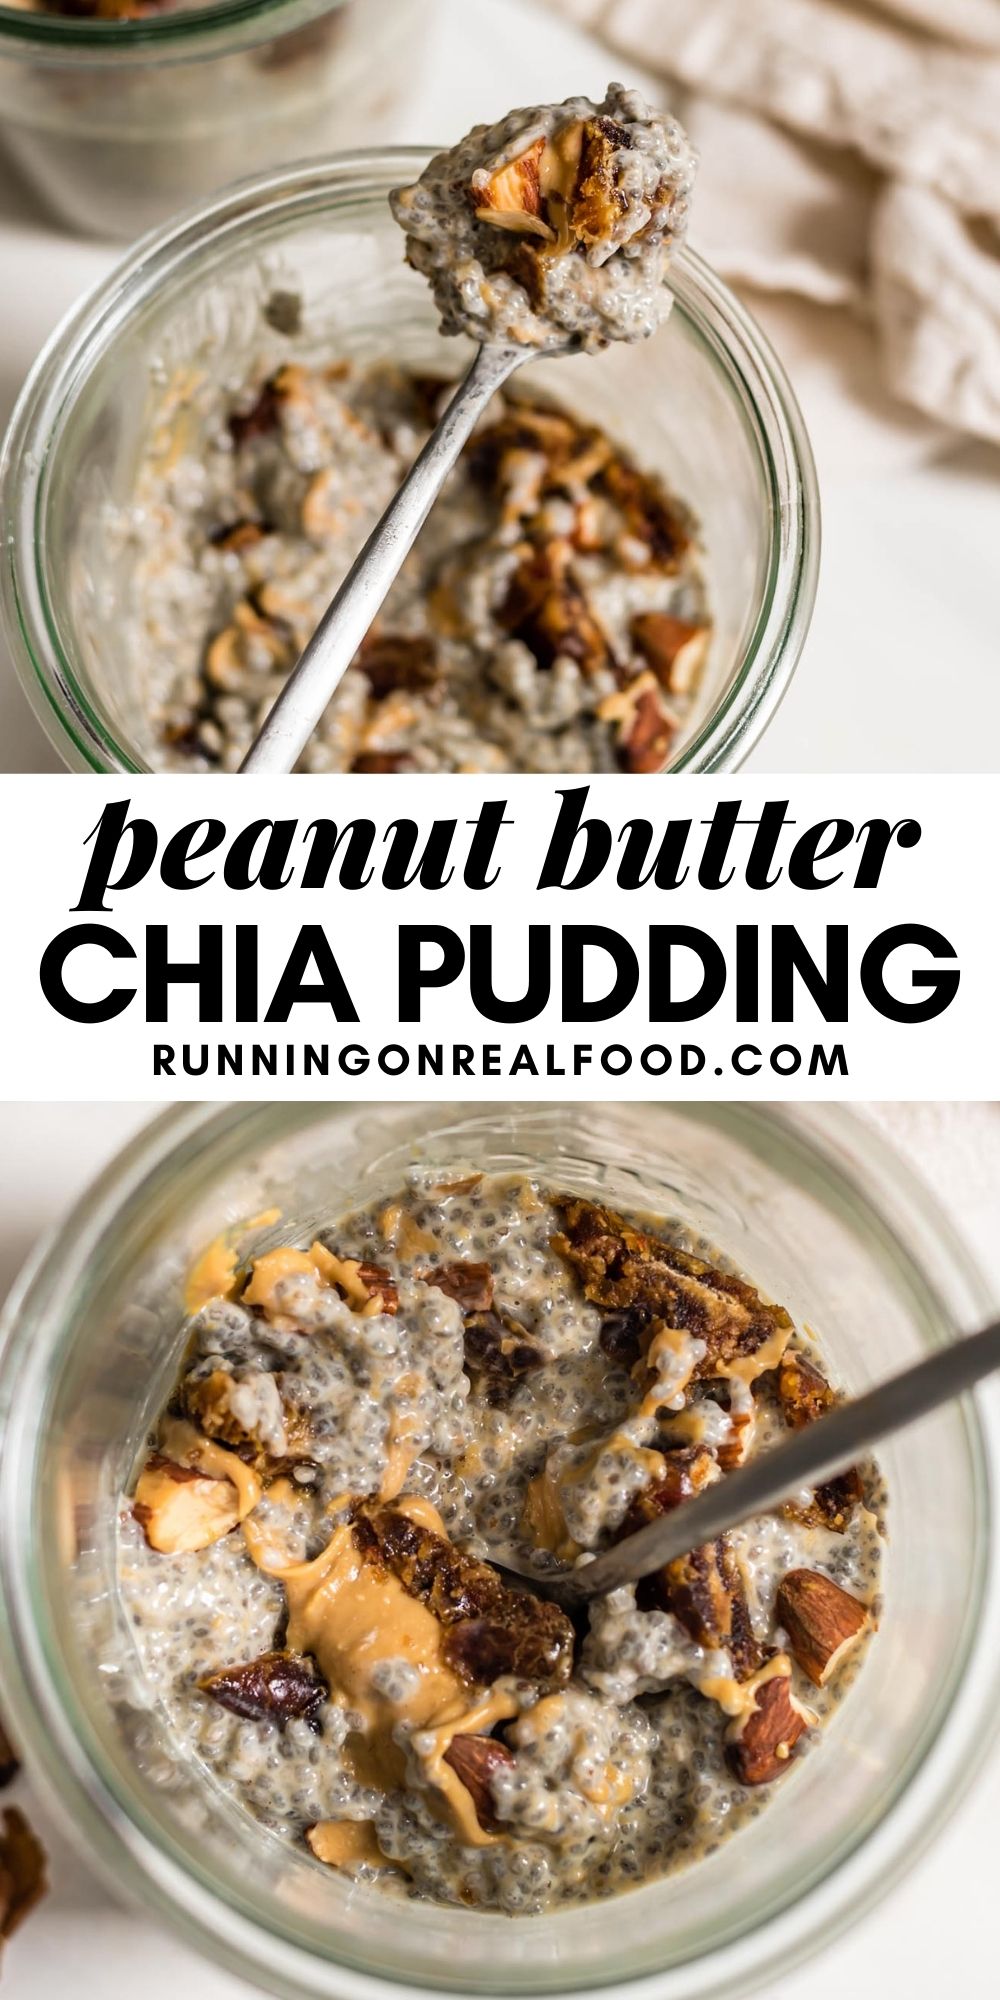 Pinterest graphic with an image and text for peanut butter chia pudding.